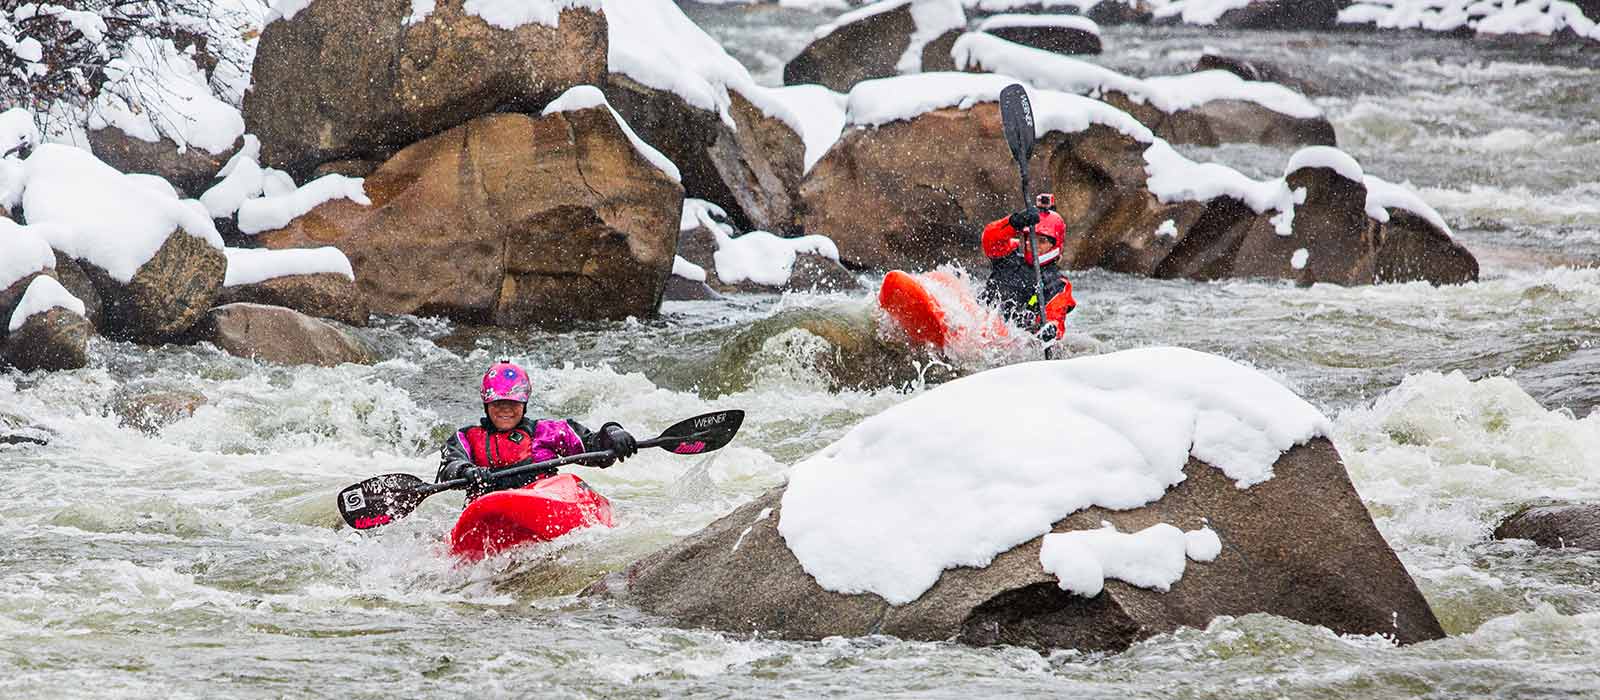 How to gear up for Winter Kayaking - Kokatat